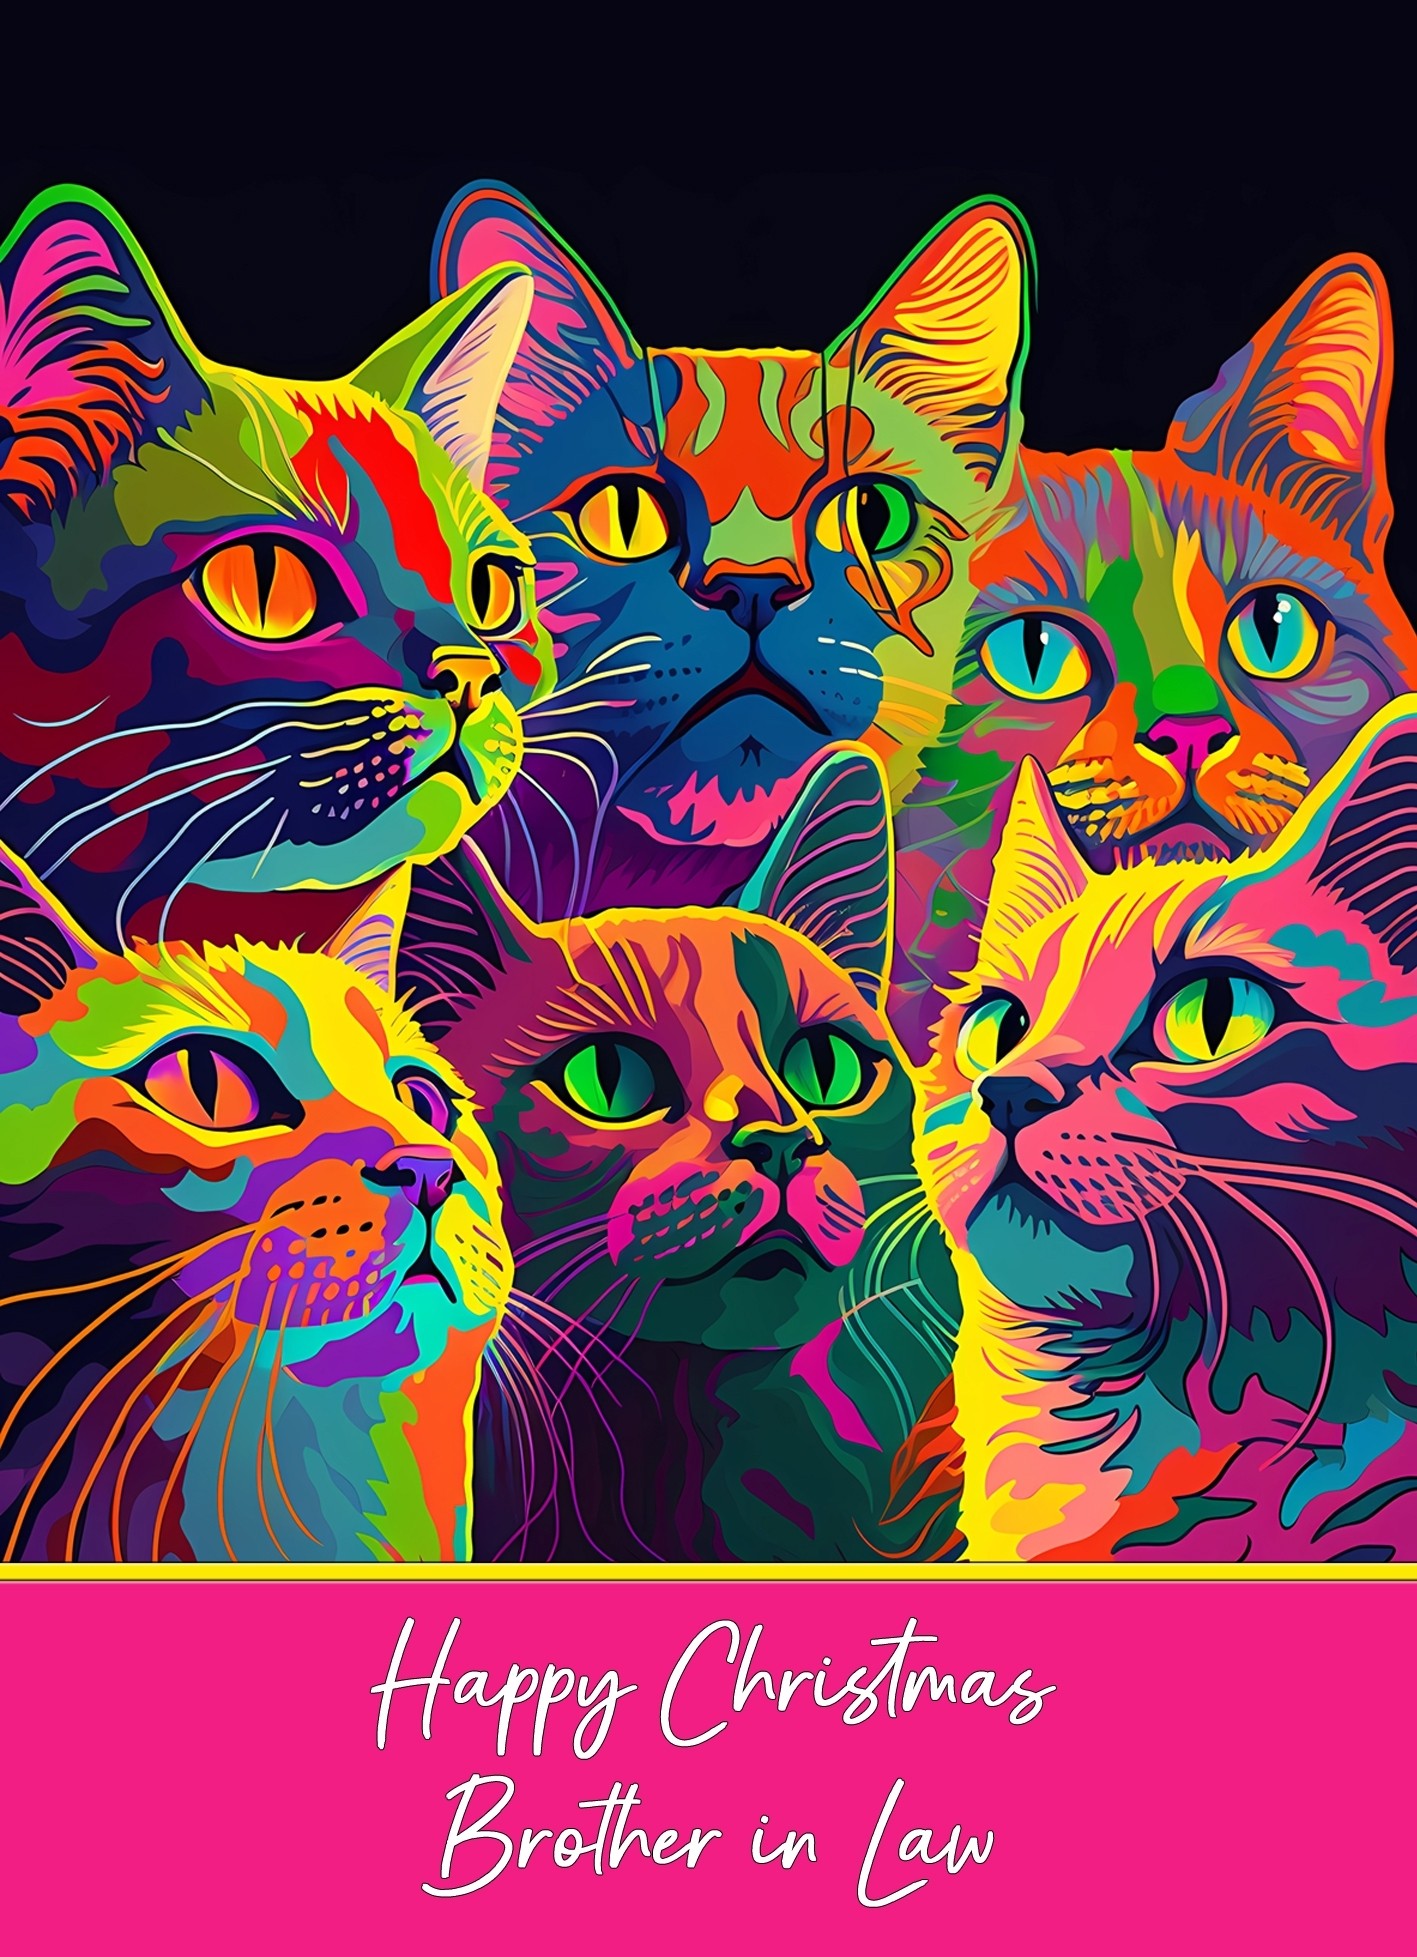 Christmas Card For Brother in Law (Colourful Cat Art)